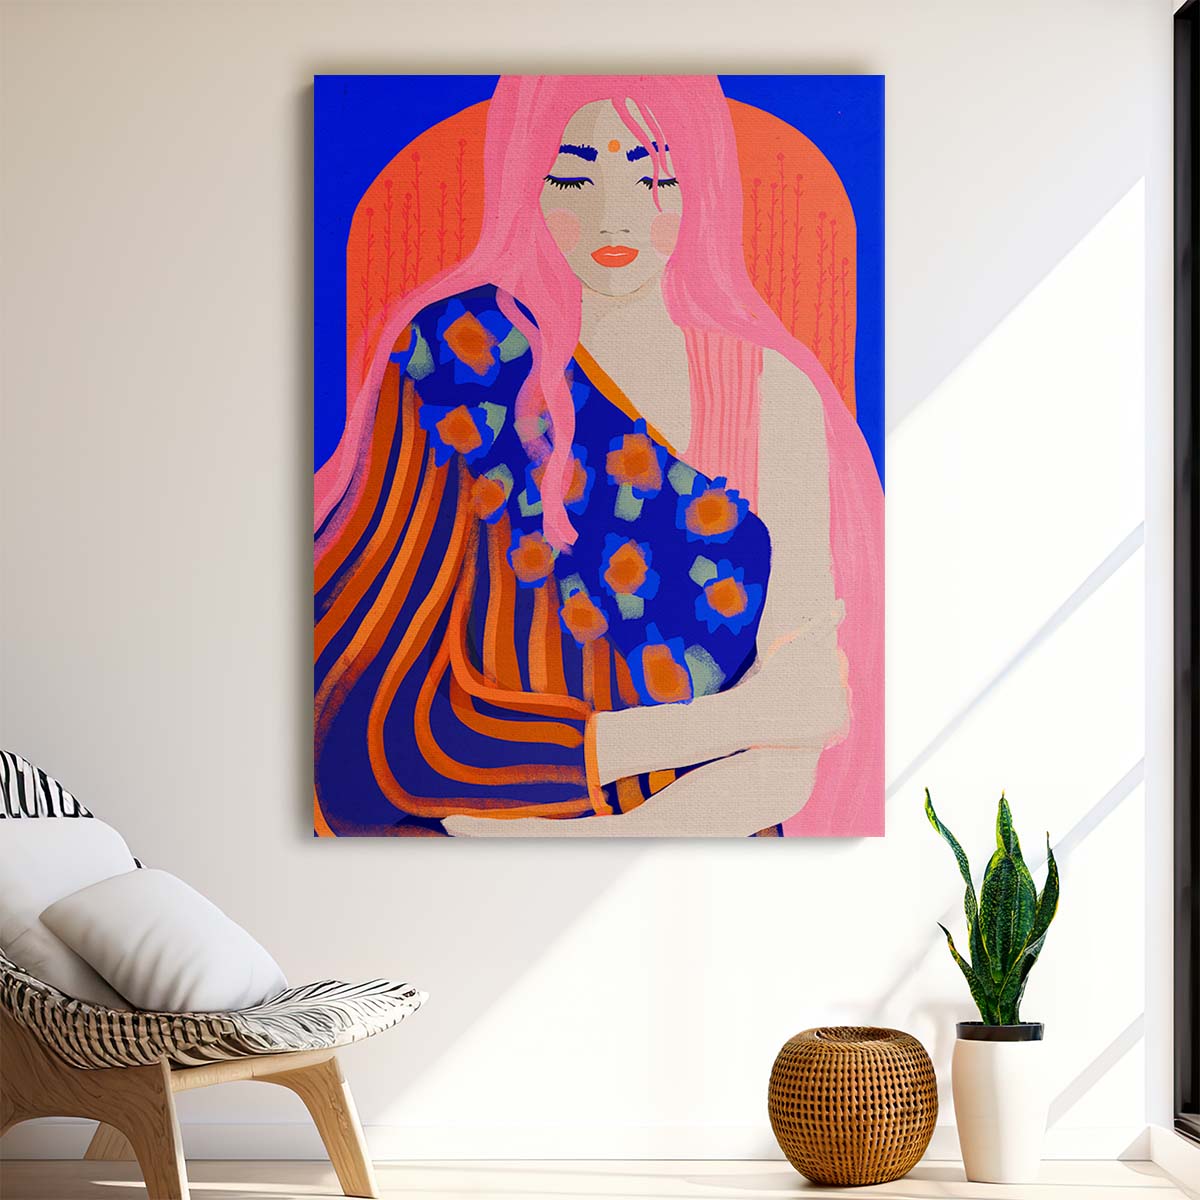 Colorful Yoga Woman Portrait Illustration by Treechild - Figurative Art by Luxuriance Designs, made in USA